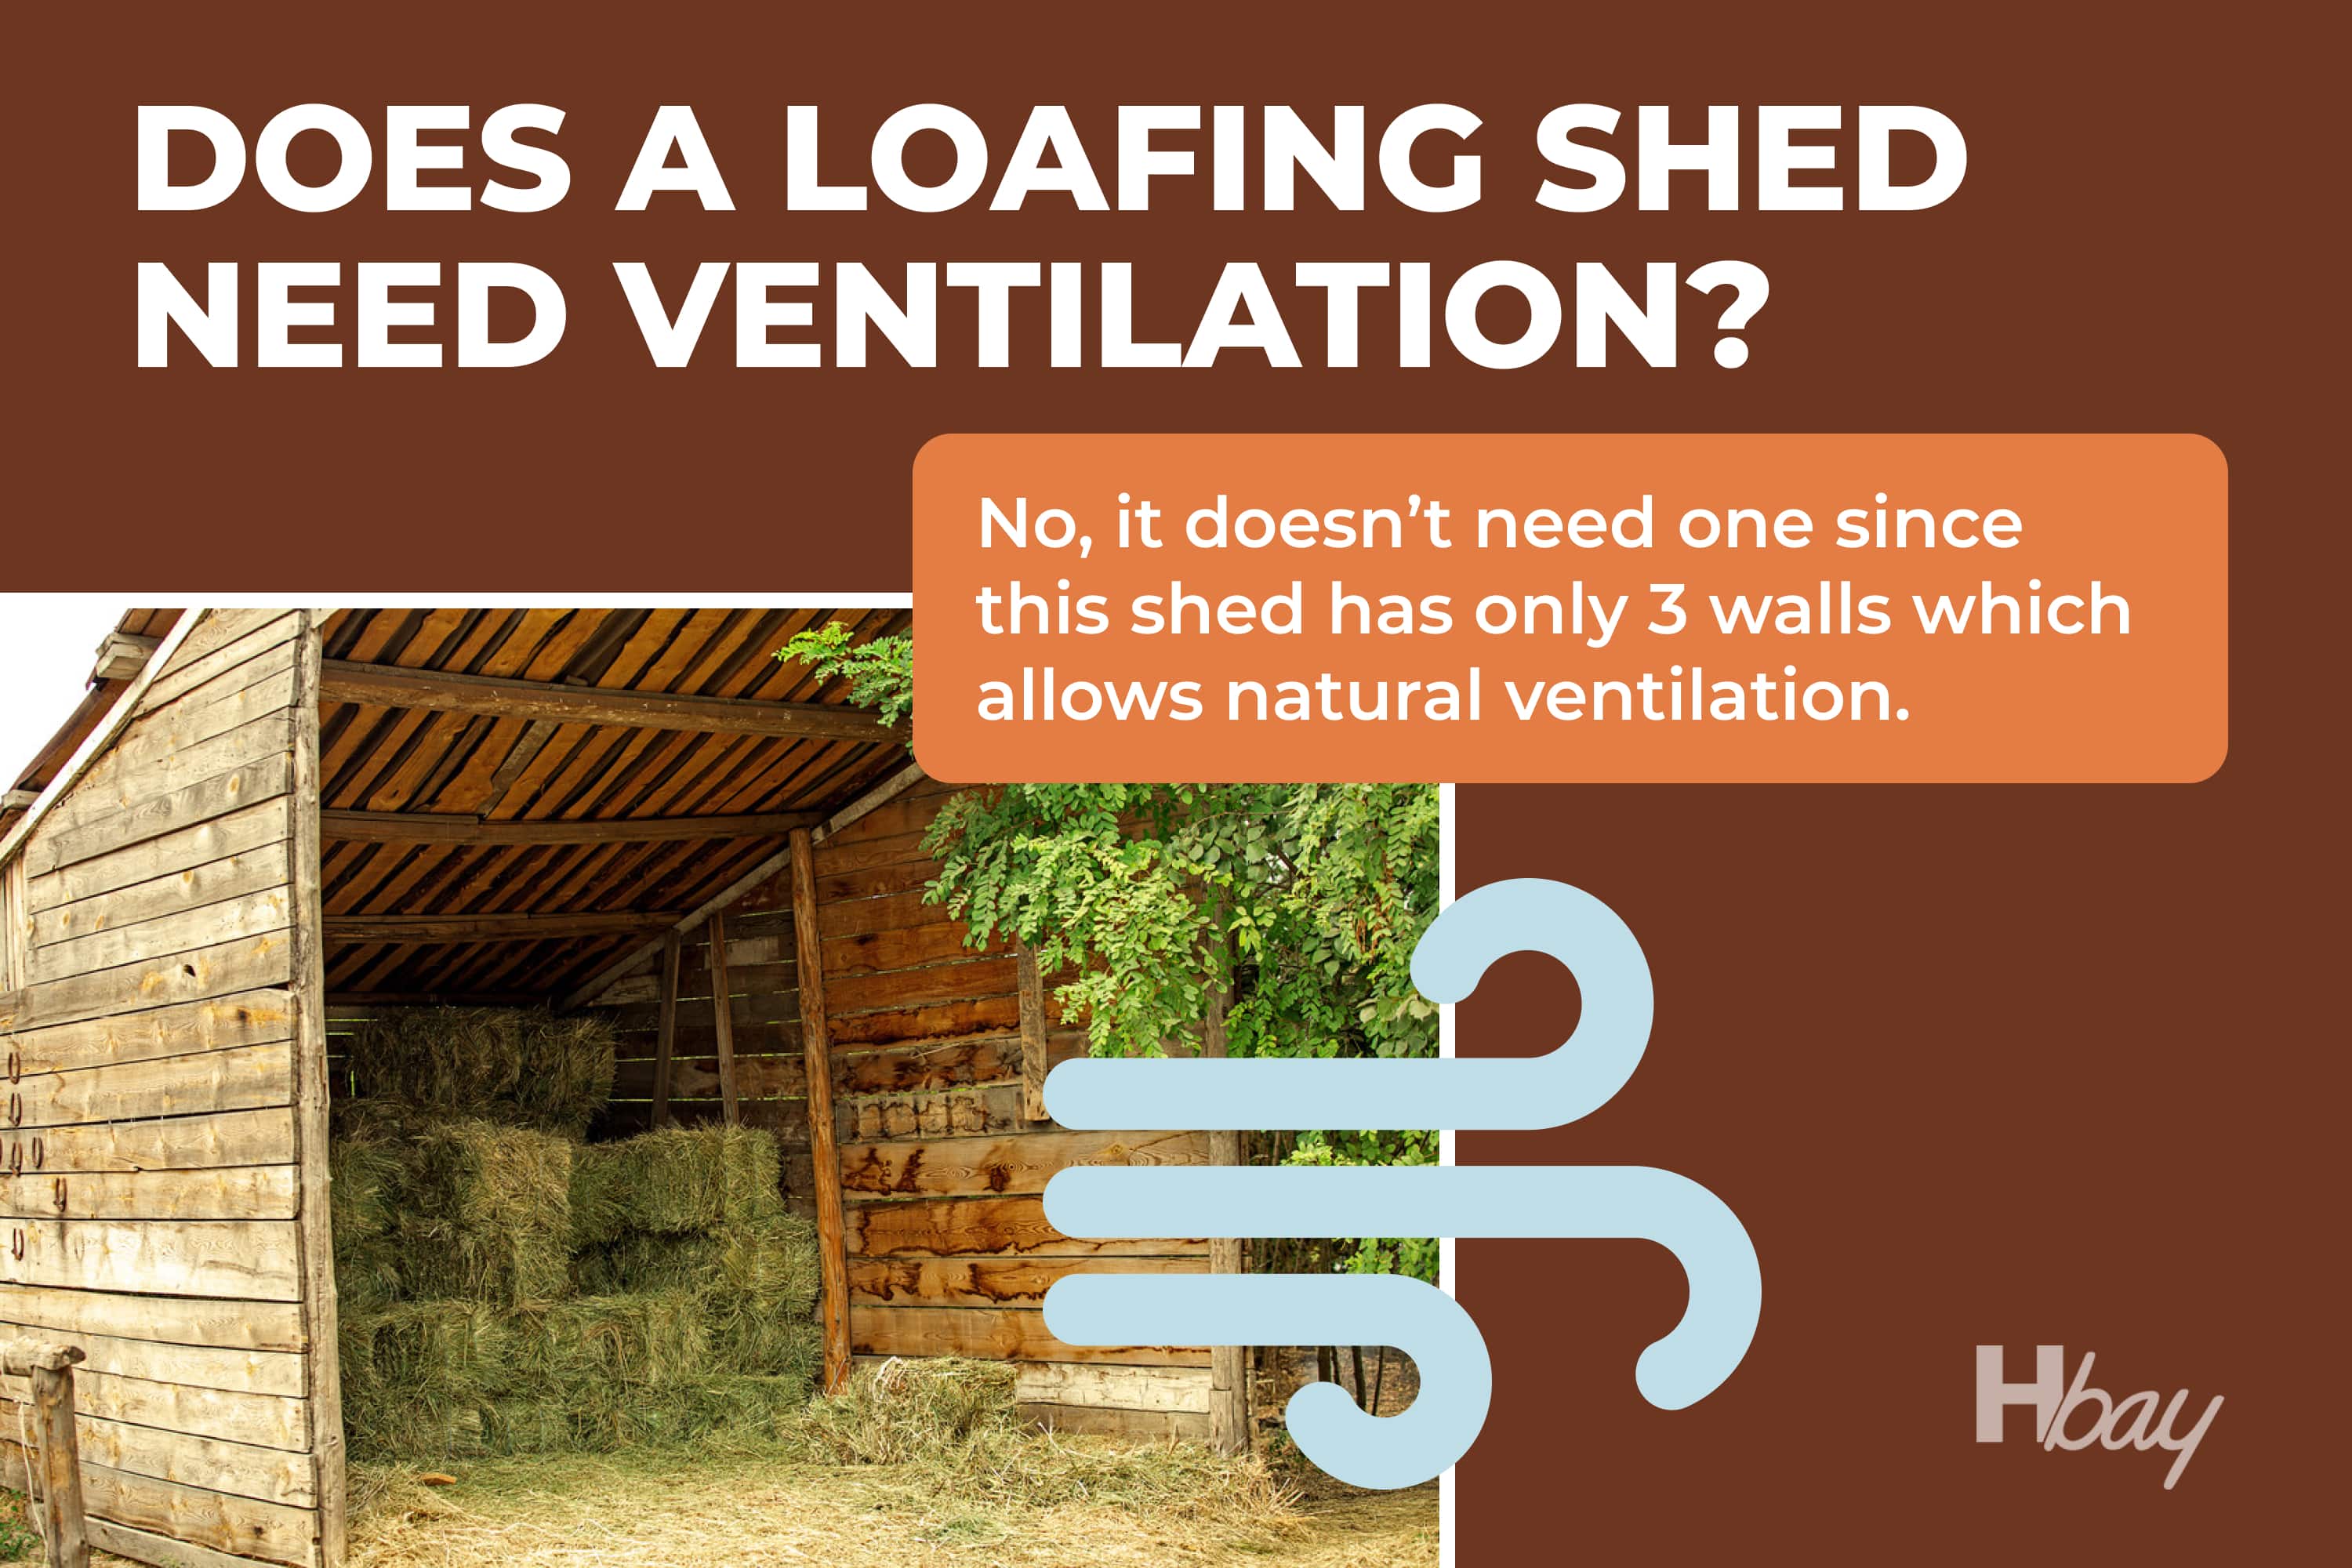 Does a loafing shed need ventilation